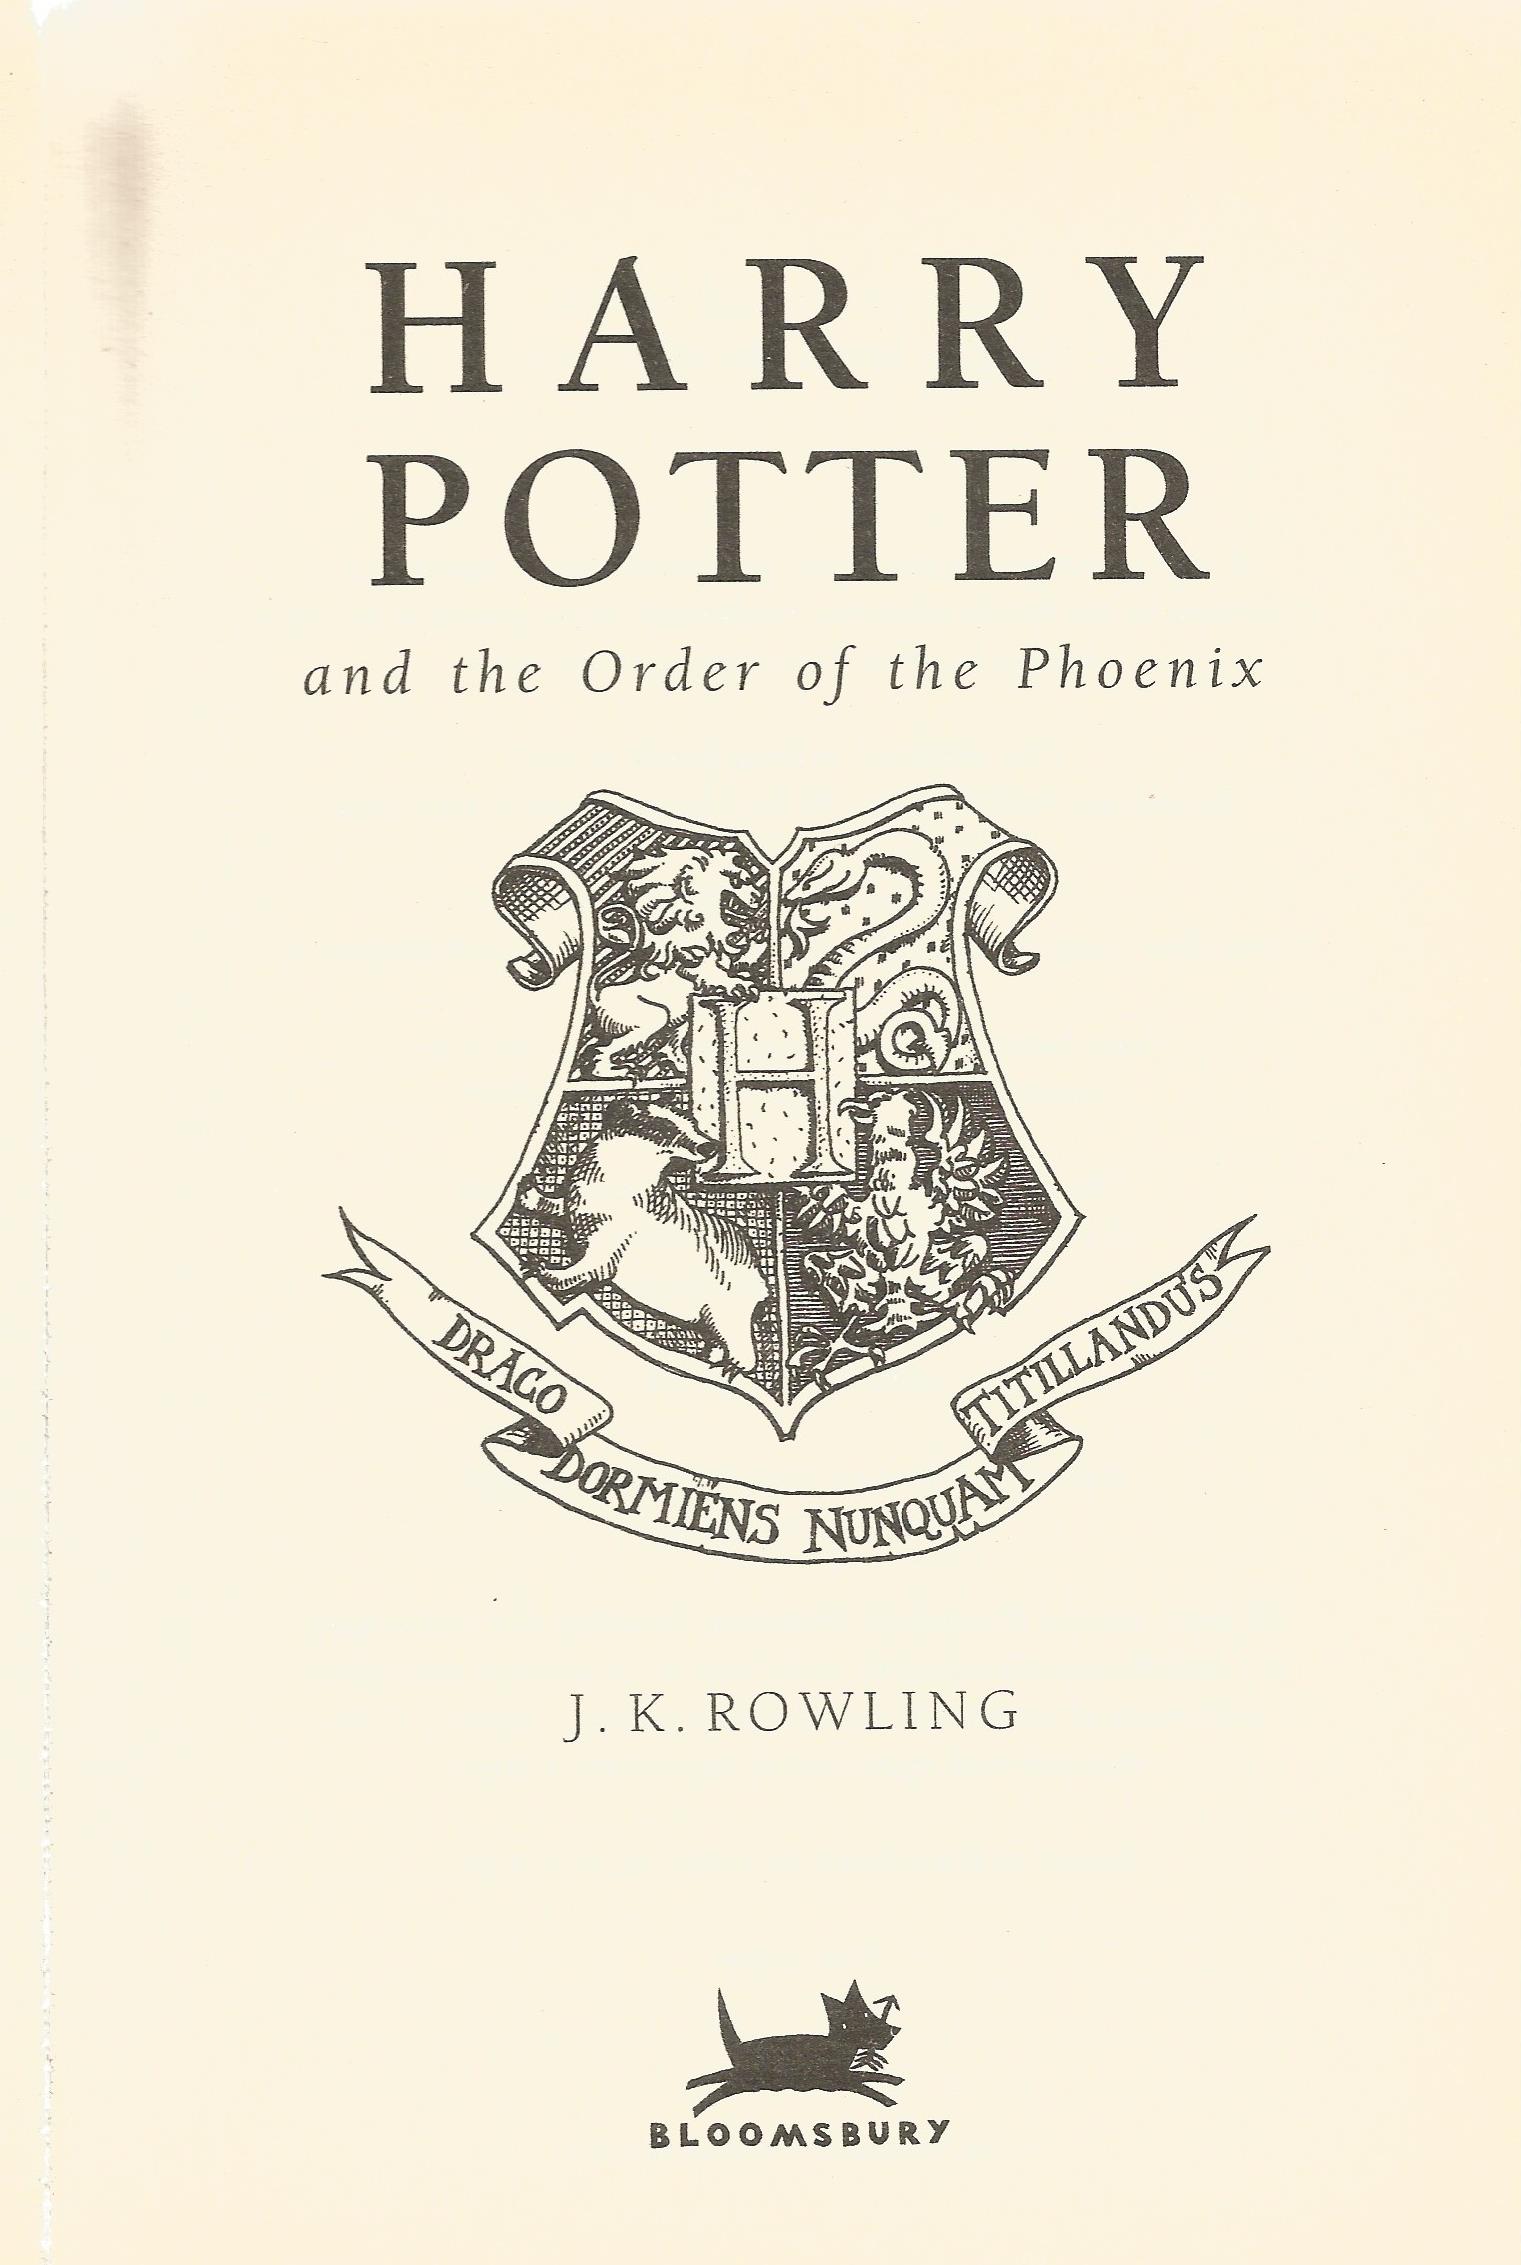 Harry Potter and the Order of the Phoenix by J K Rowling Hardback Book 2003 First Edition - Image 2 of 3